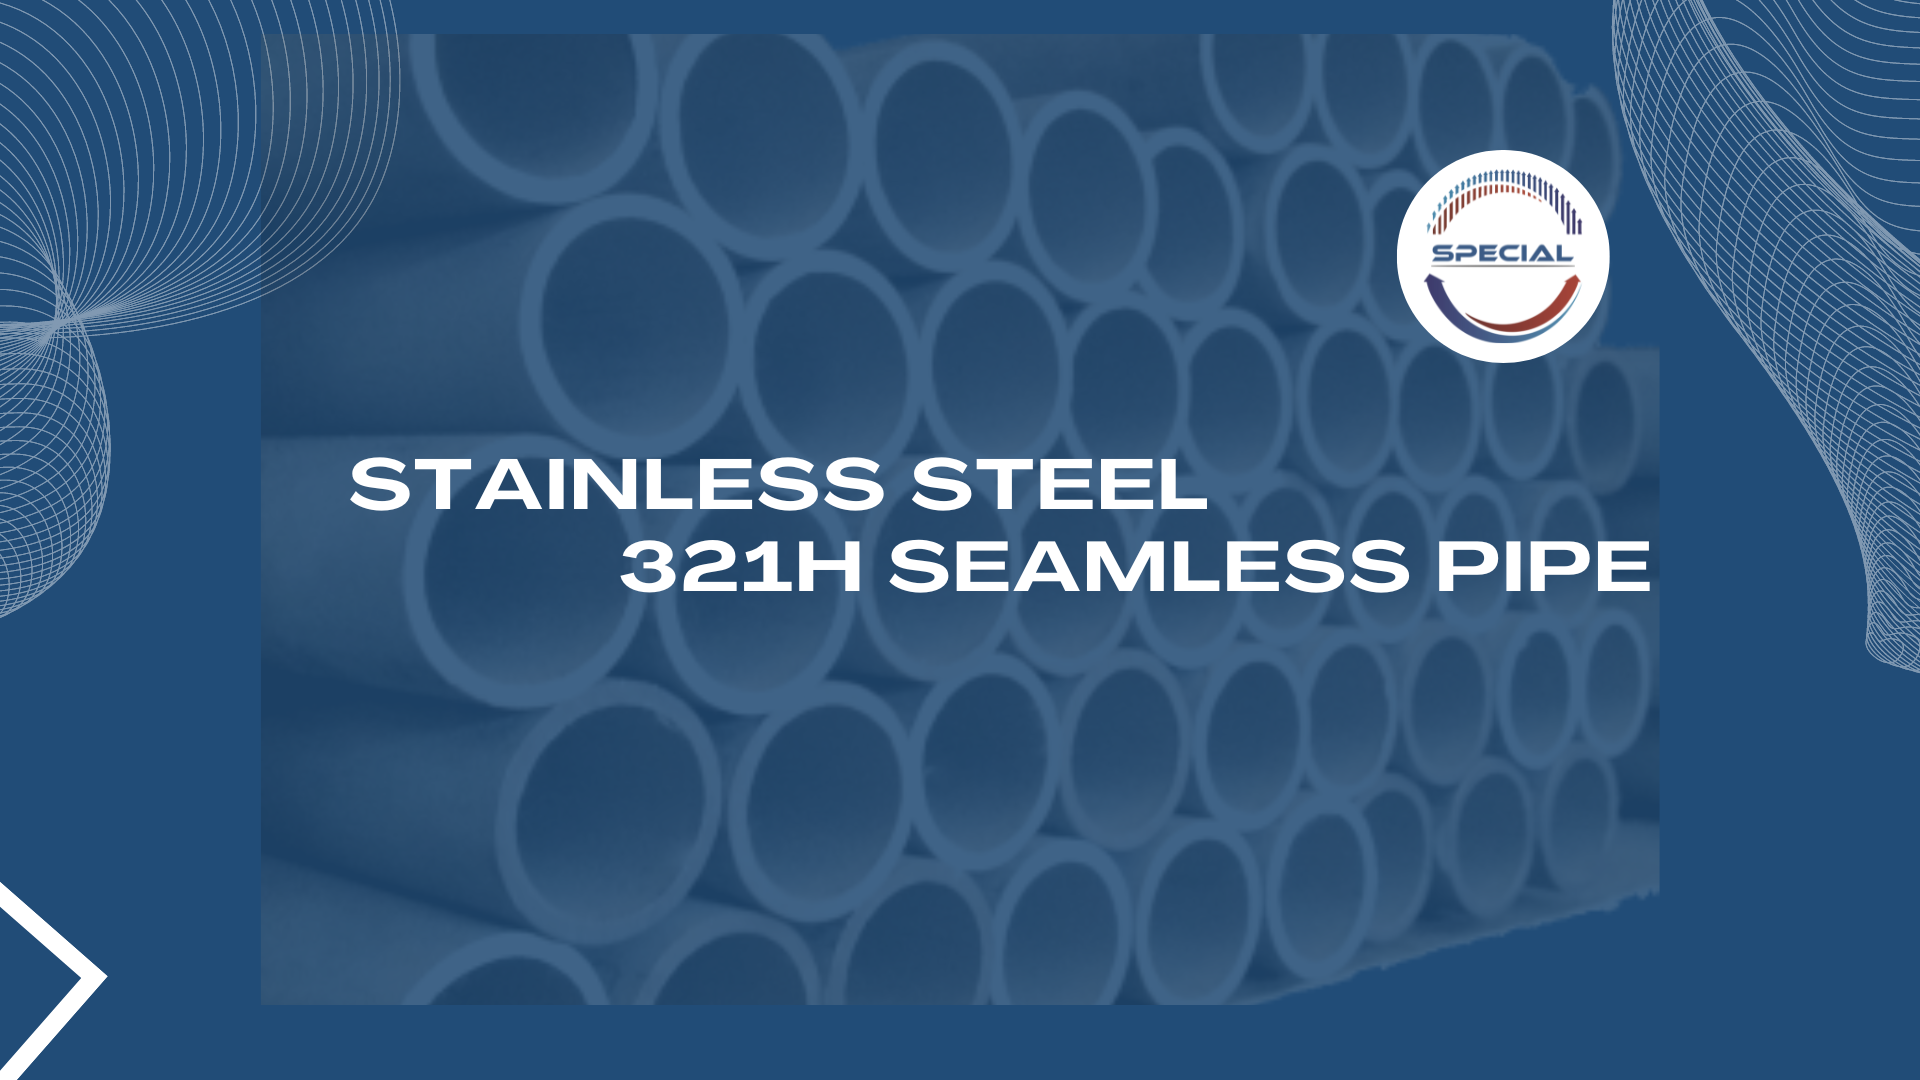 Stainless steel 321H seamless pipe